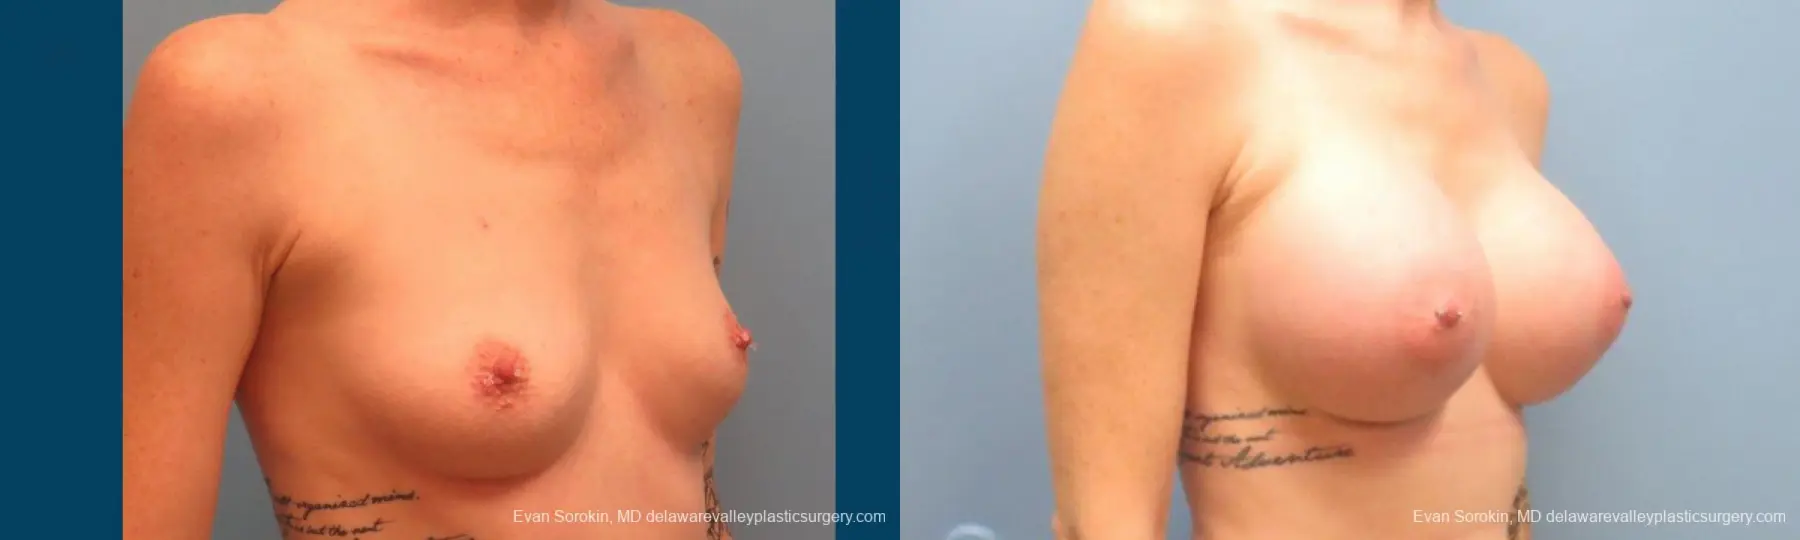 Philadelphia Breast Augmentation 9371 - Before and After 2